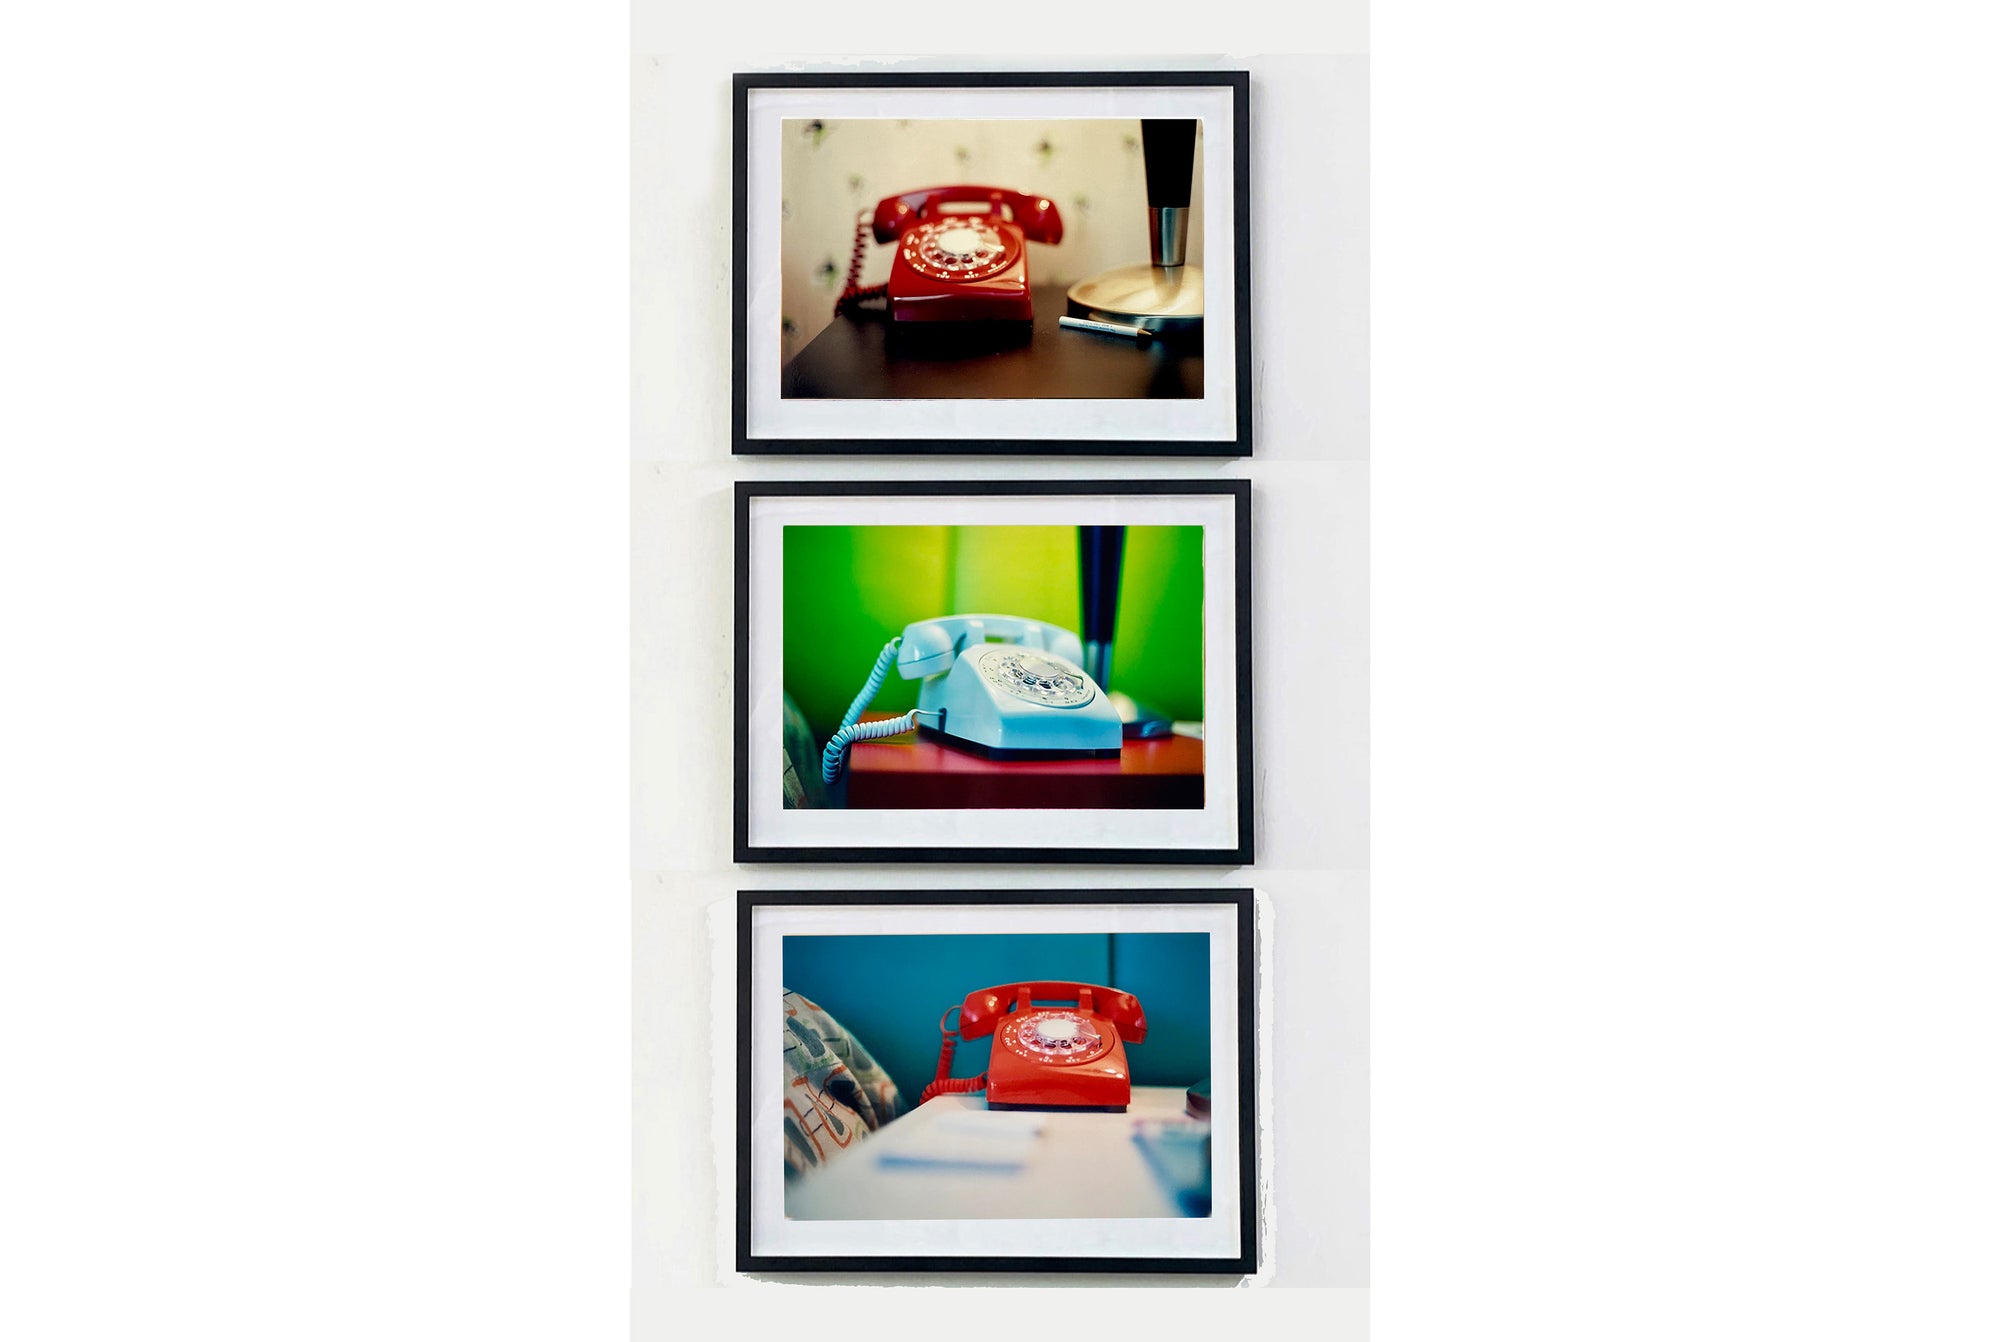 The Coolest Place, Ballantines Movie Colony, Palm Springs, California. Part of Richard Heeps 'Dream in Colour' Series, this cool Palm Springs interiors picture featuring a vintage telephone on a nightstand combines gorgeous colours and dreamy nostalgic mid-century vibes.